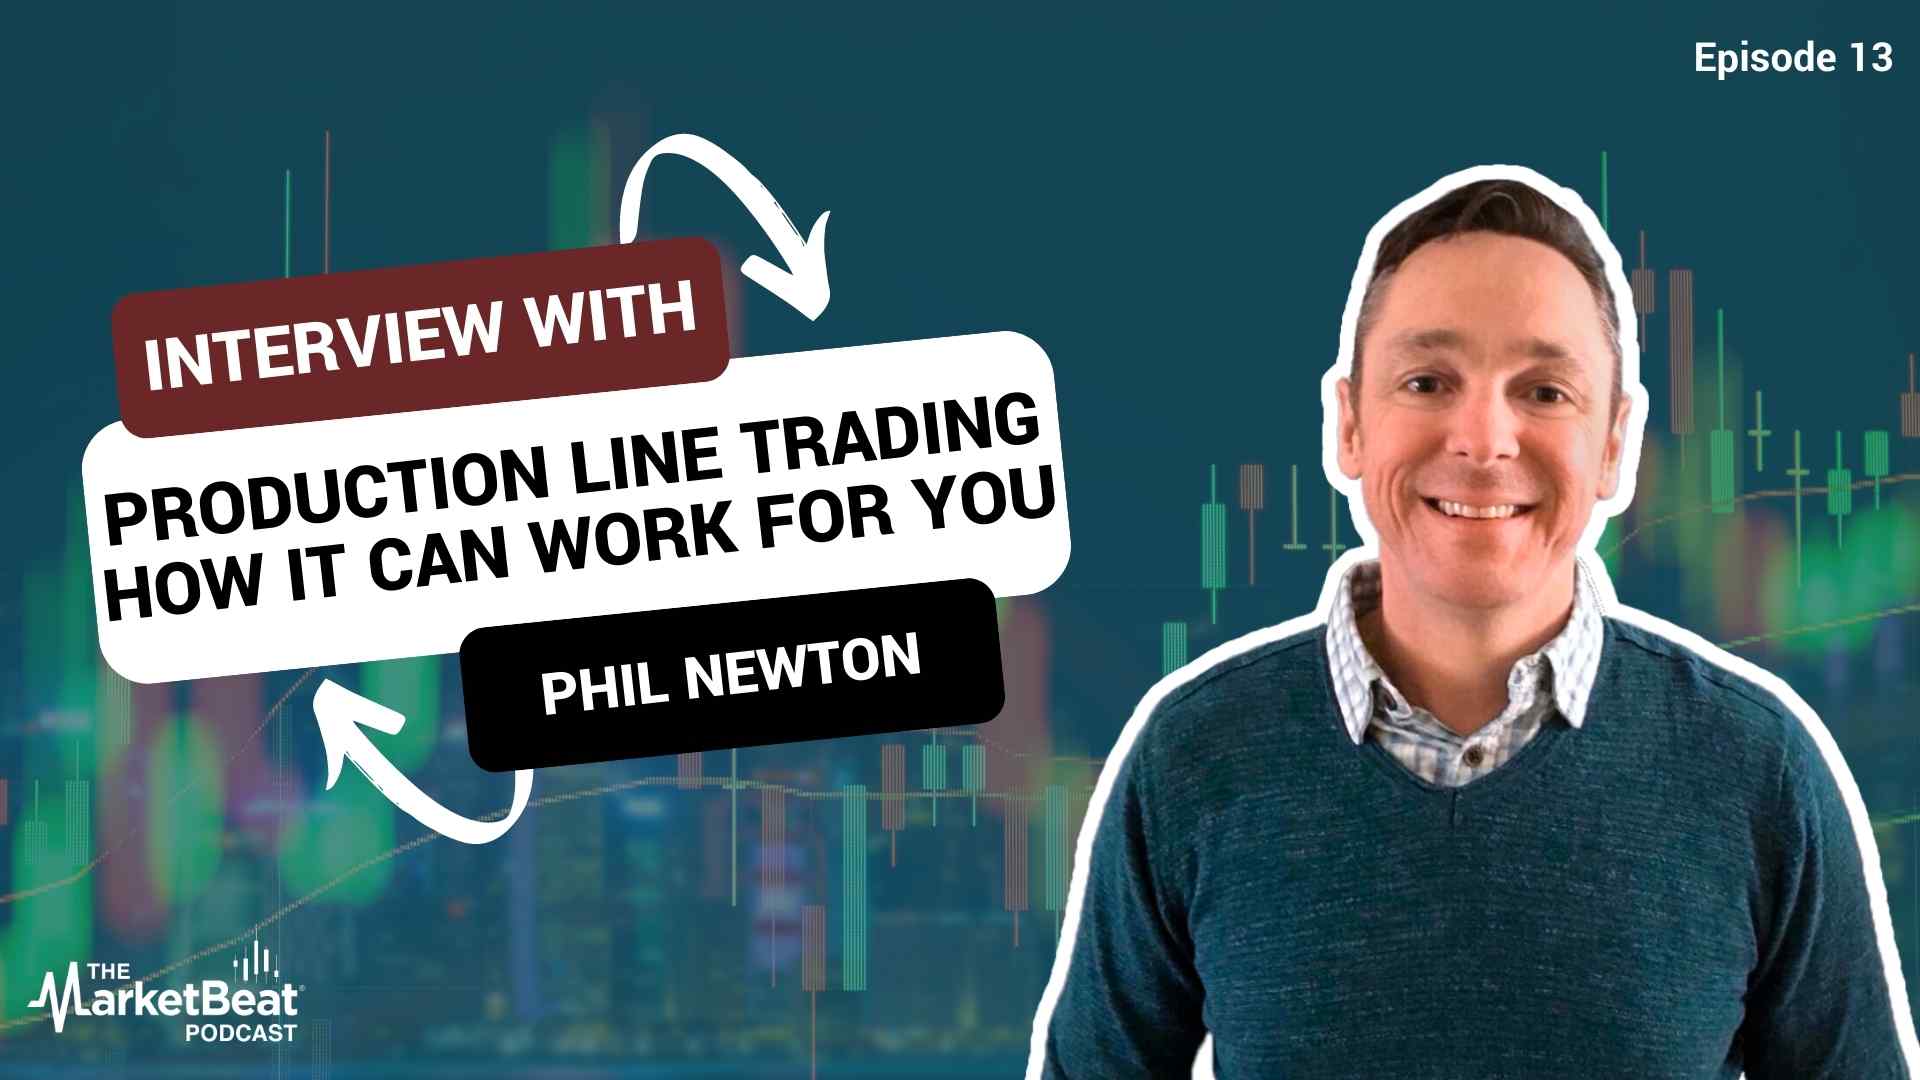 Production Line Trading - How it Can Work For You (Episode 13)